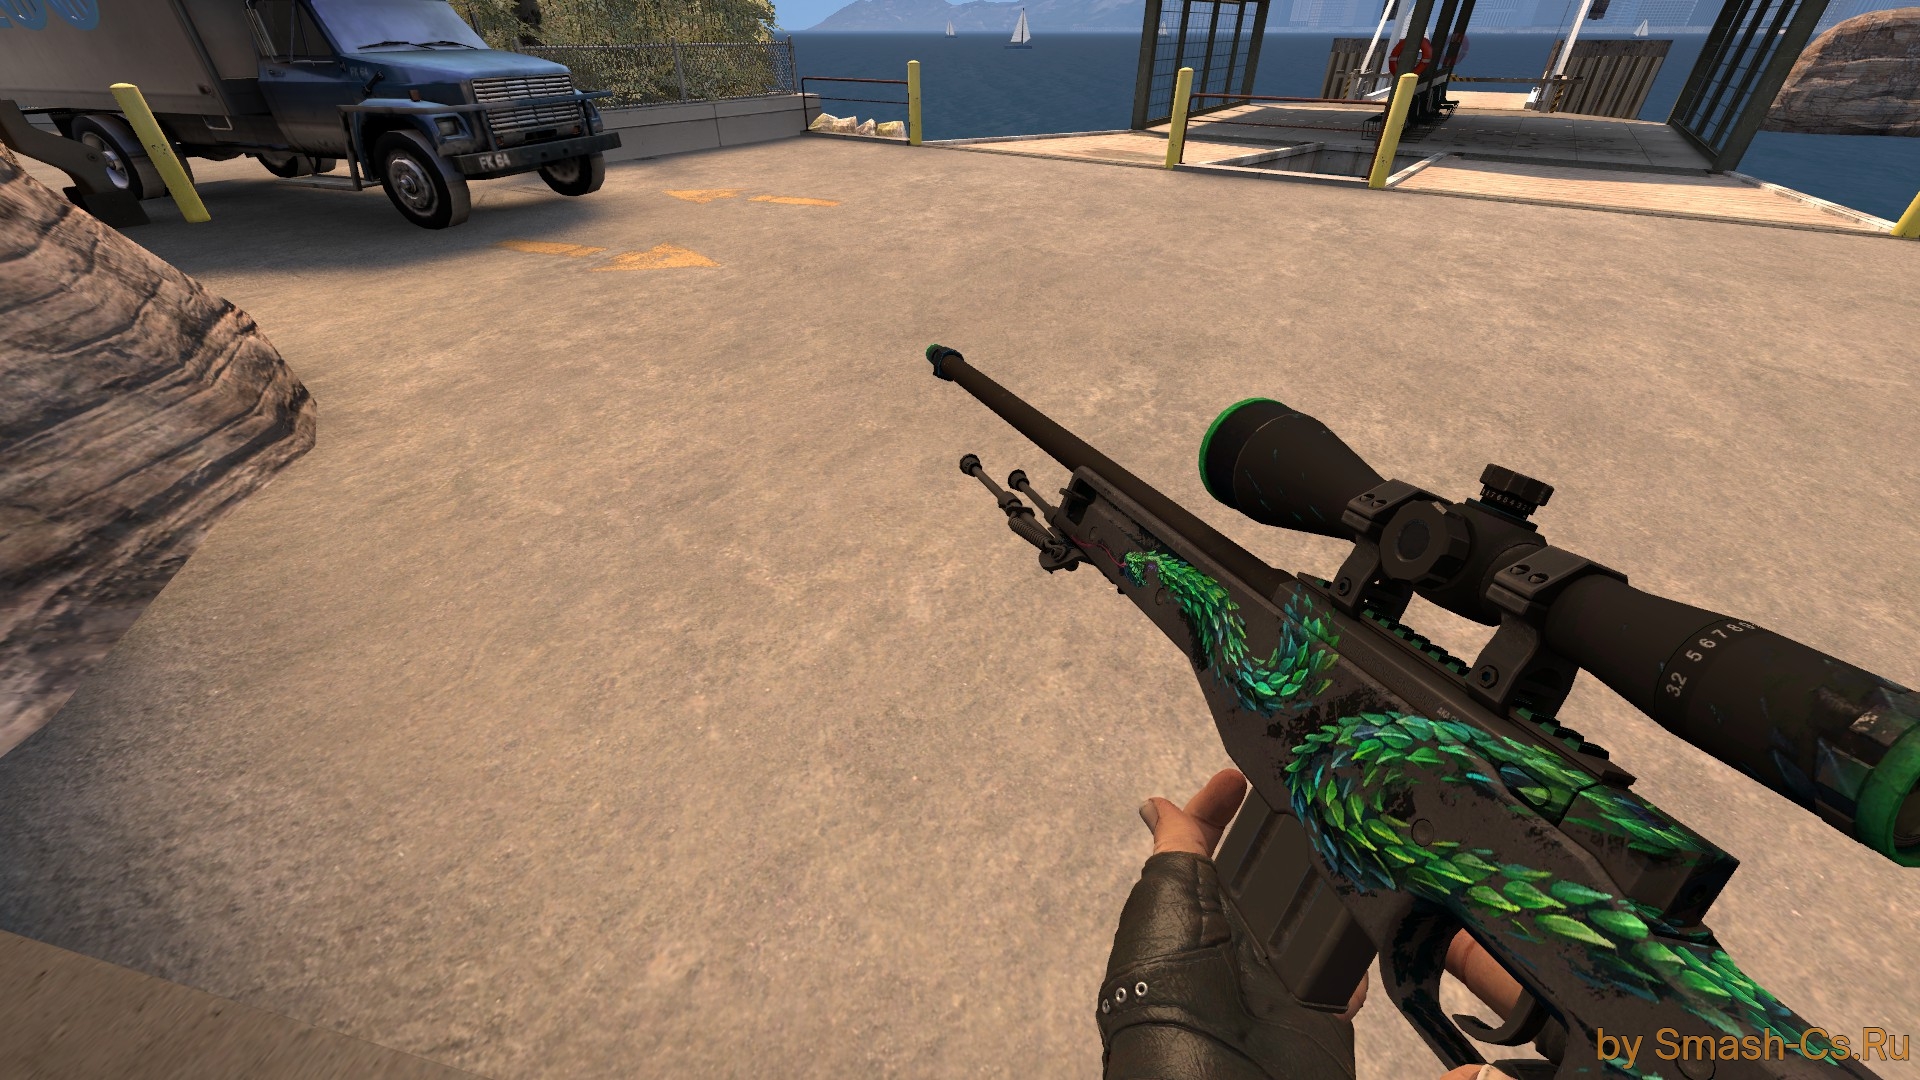 Steam Community :: Screenshot :: AWP  Atheris (Battle-Scarred) - Top #1 of  the BS. Float Value: 0.99994432926177978516